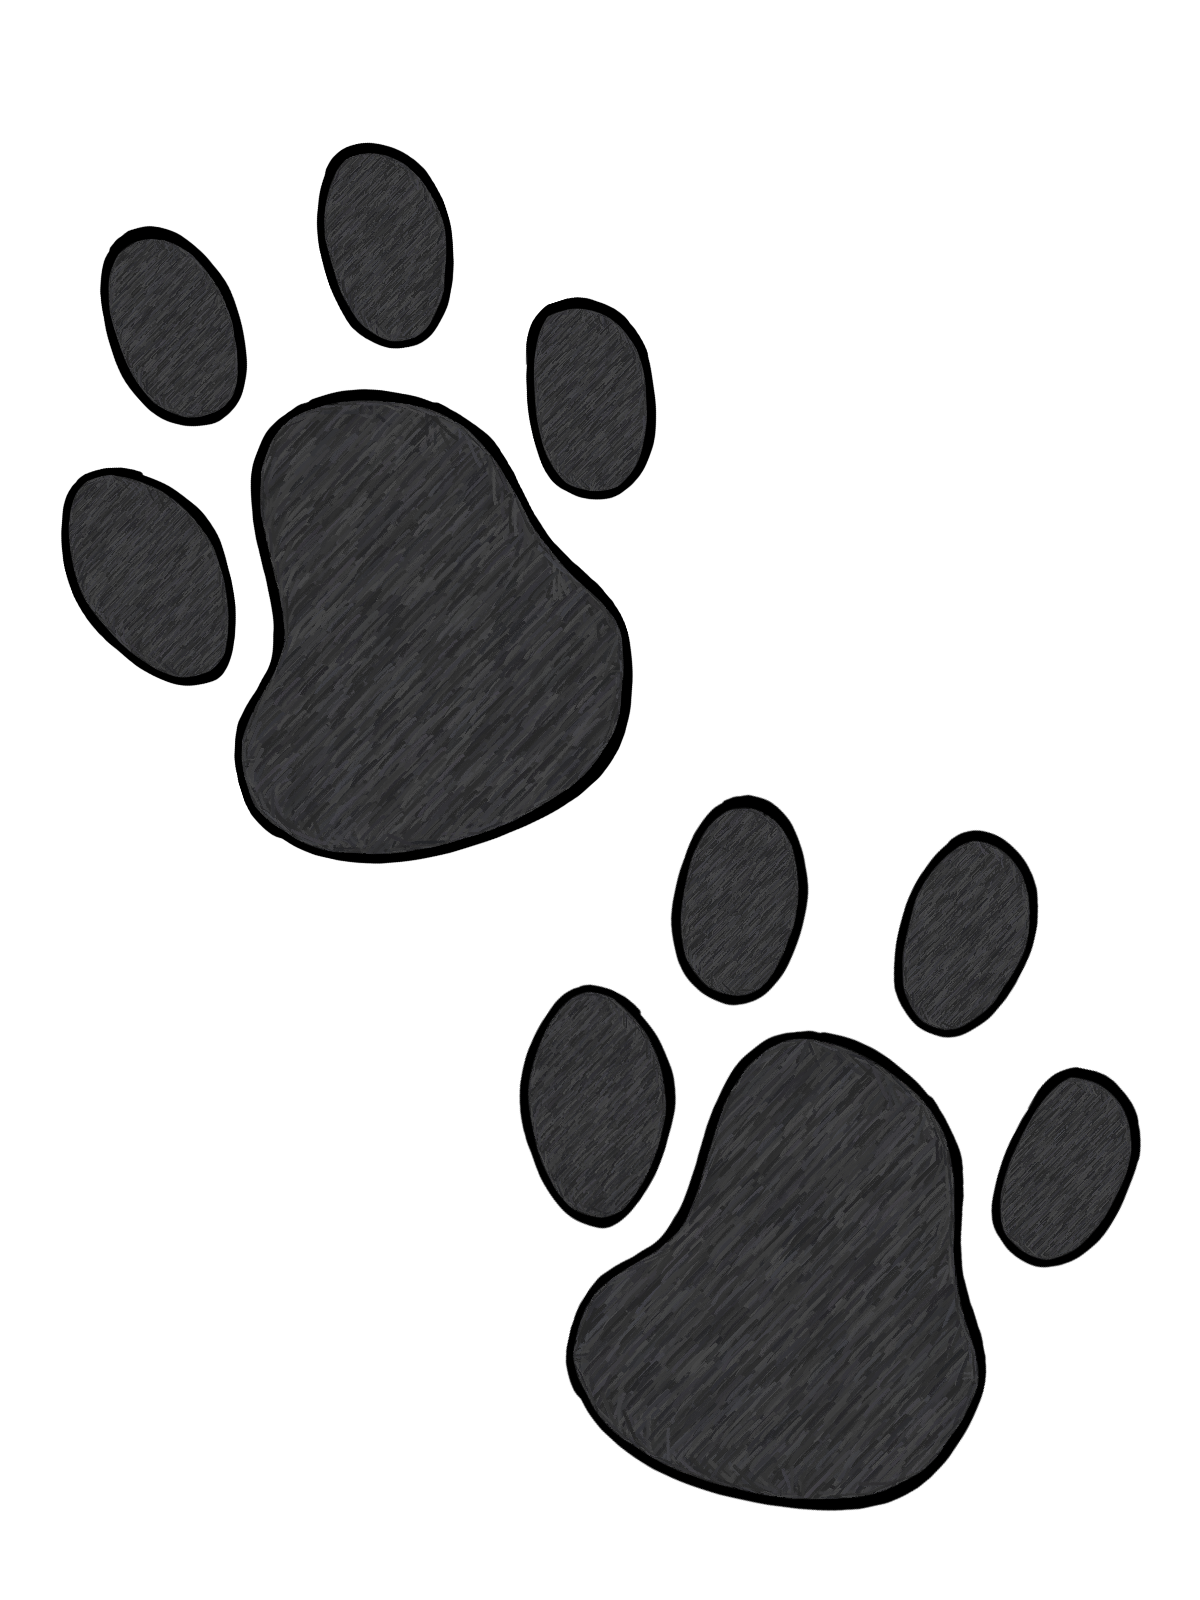 Paw print tattoos on dog paw prints scroll clipart 3 4 wikiclipart